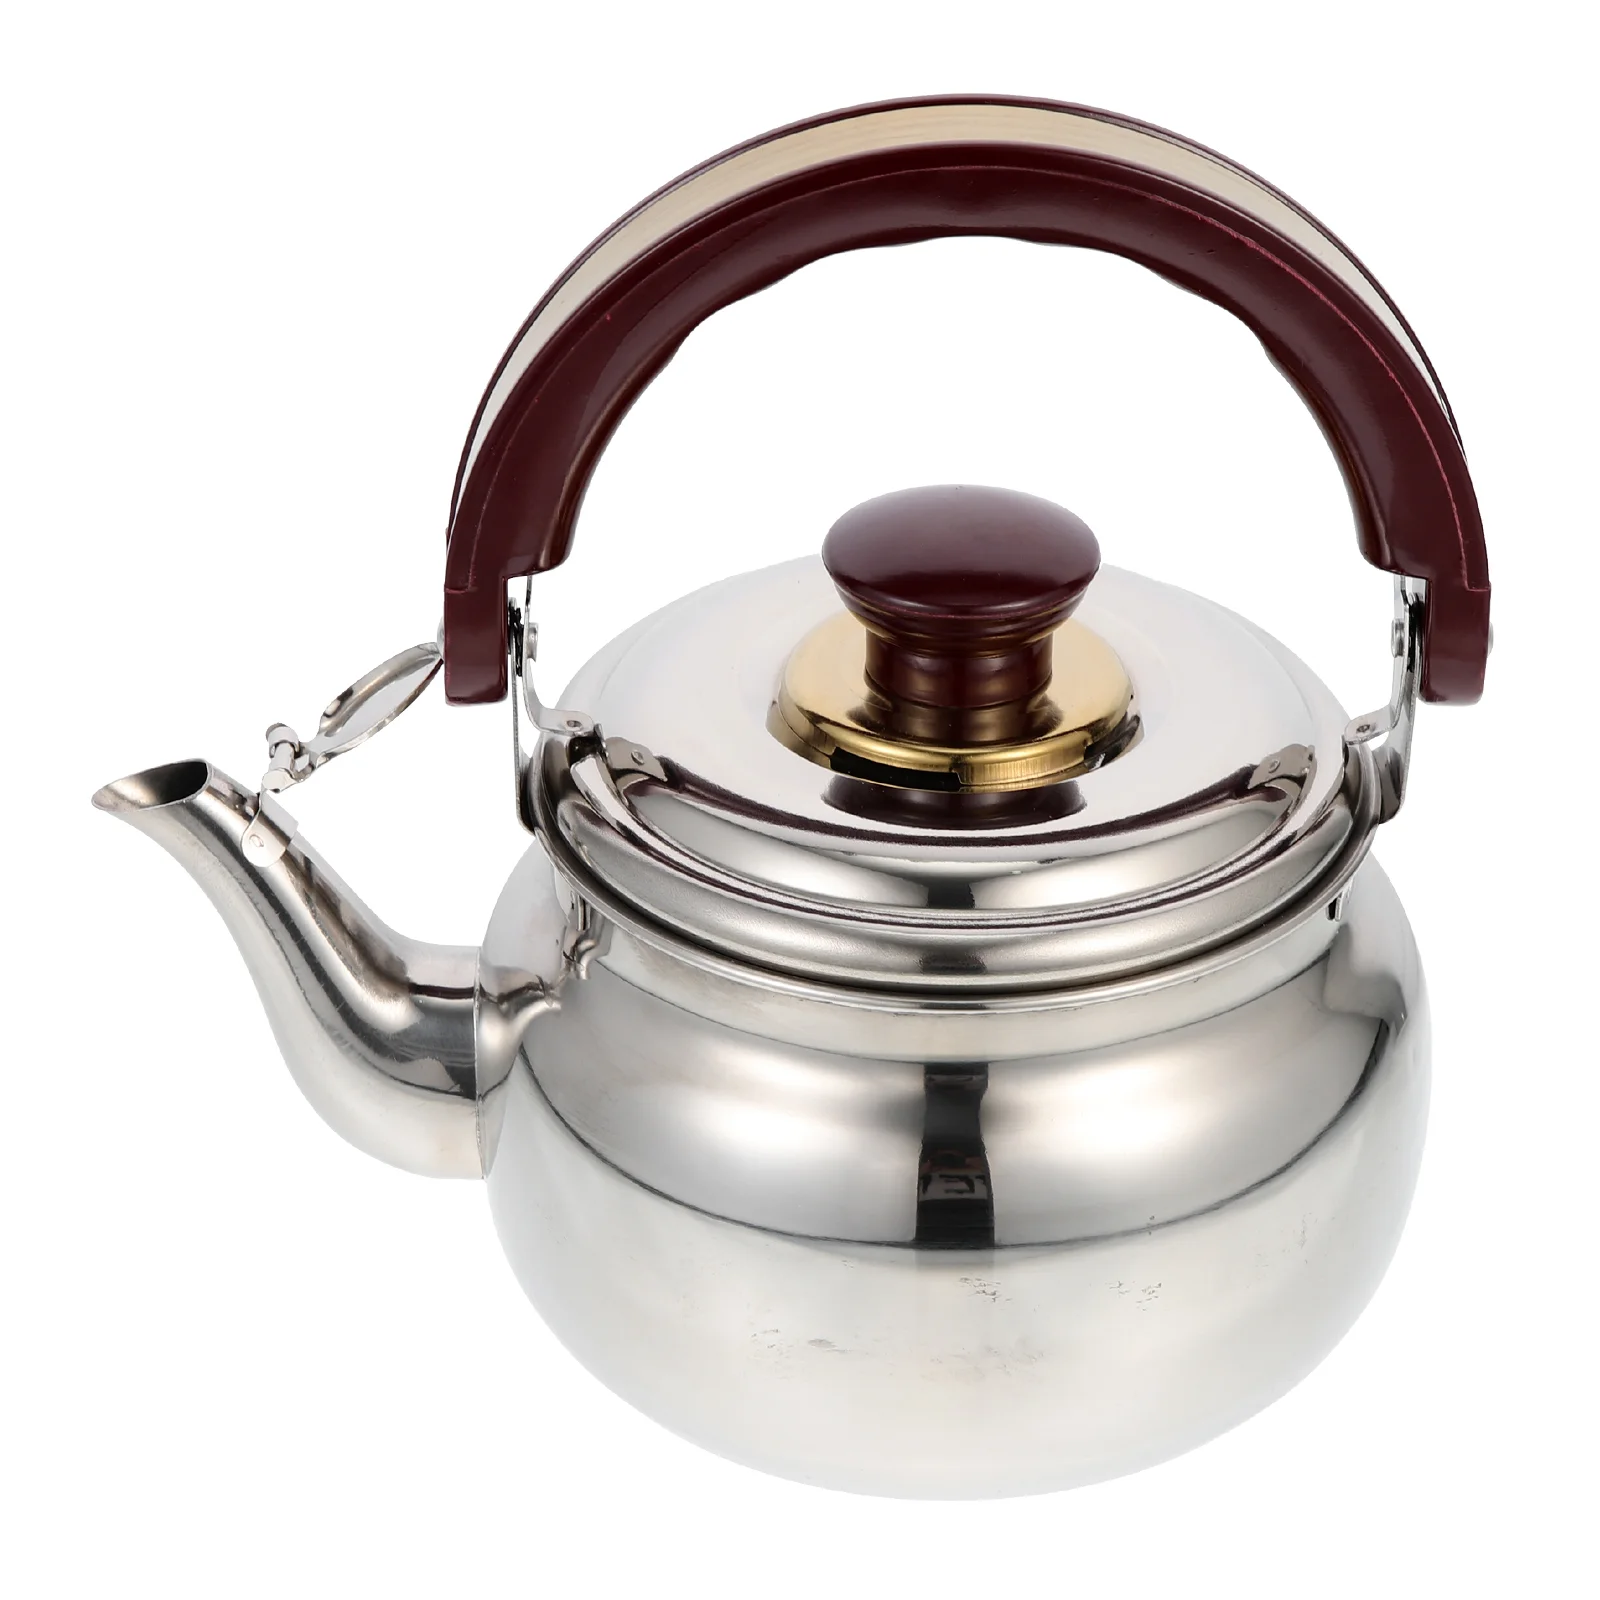 

Kettle Tea Teapot Stovesteel Stainlesswater Stovetop Boiler Pot Camping Electric Whistling Pots Inductionmetal Kettles Leaf